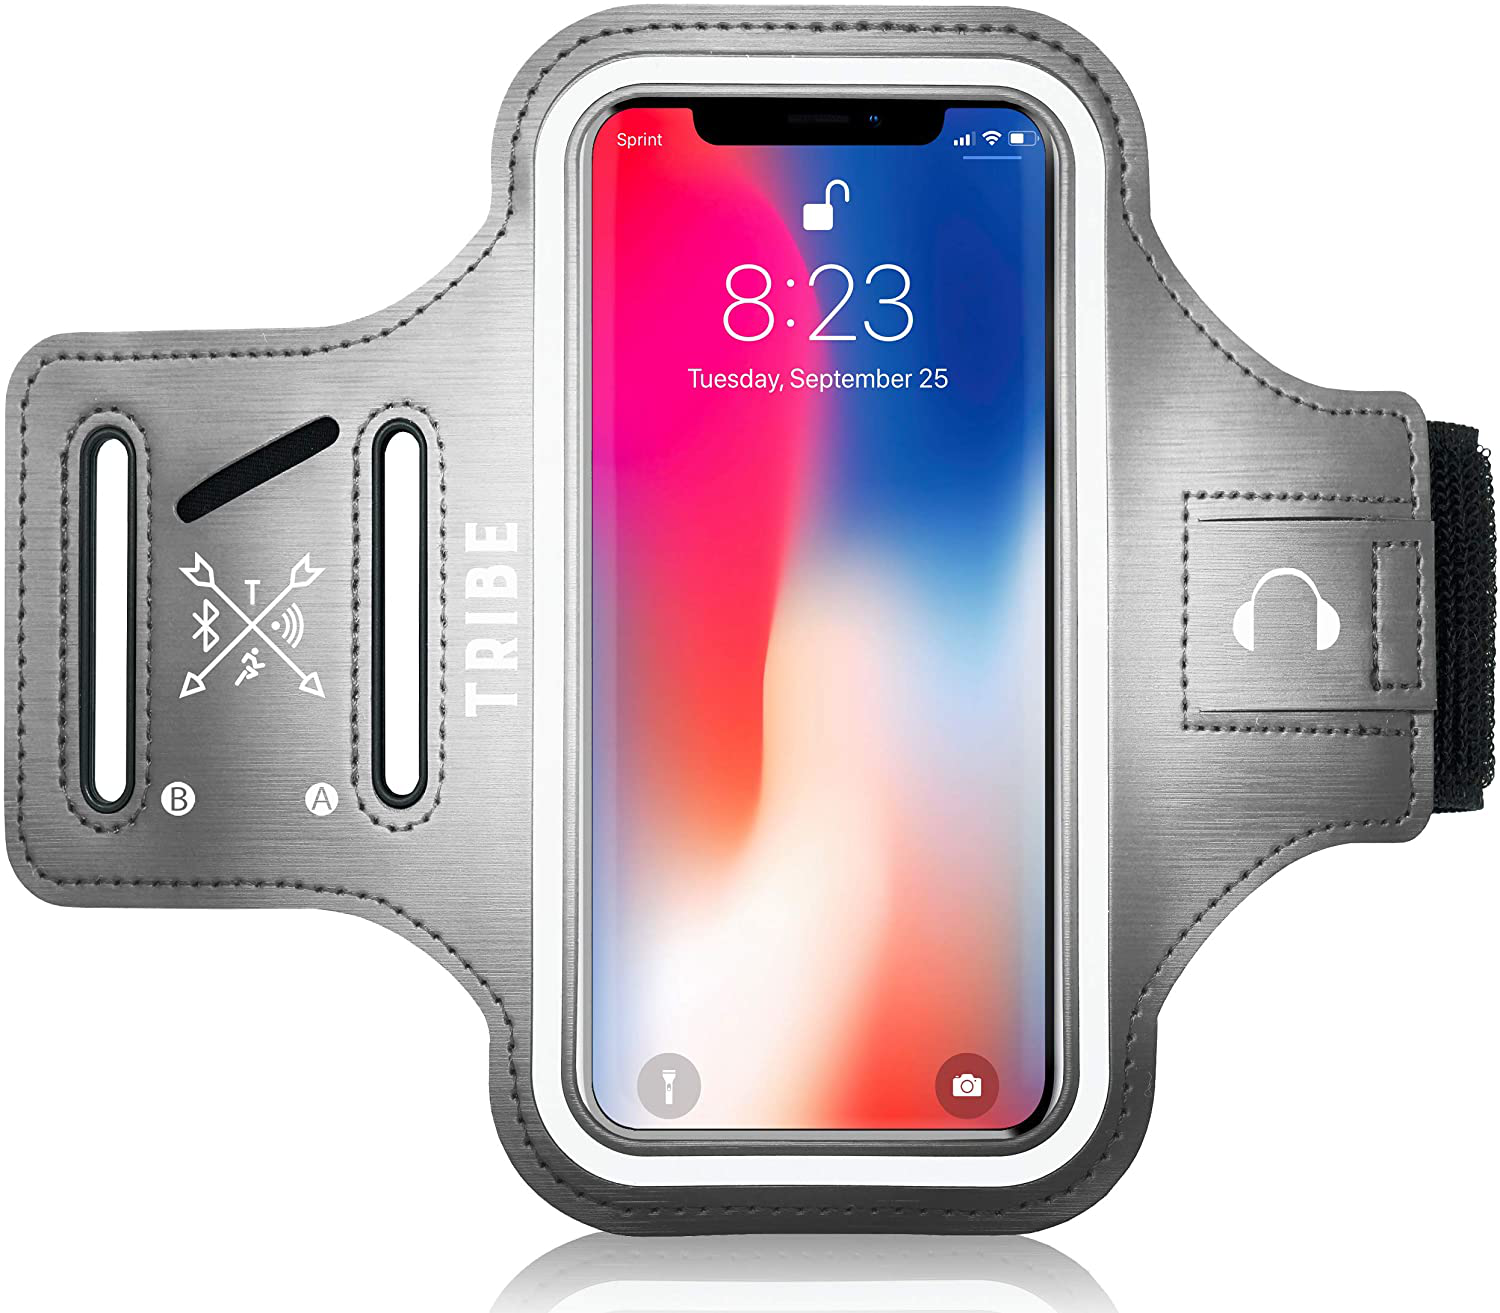 Water Resistant Cell Phone Armband Case Running Holder Compatible with iPhone and Android Models